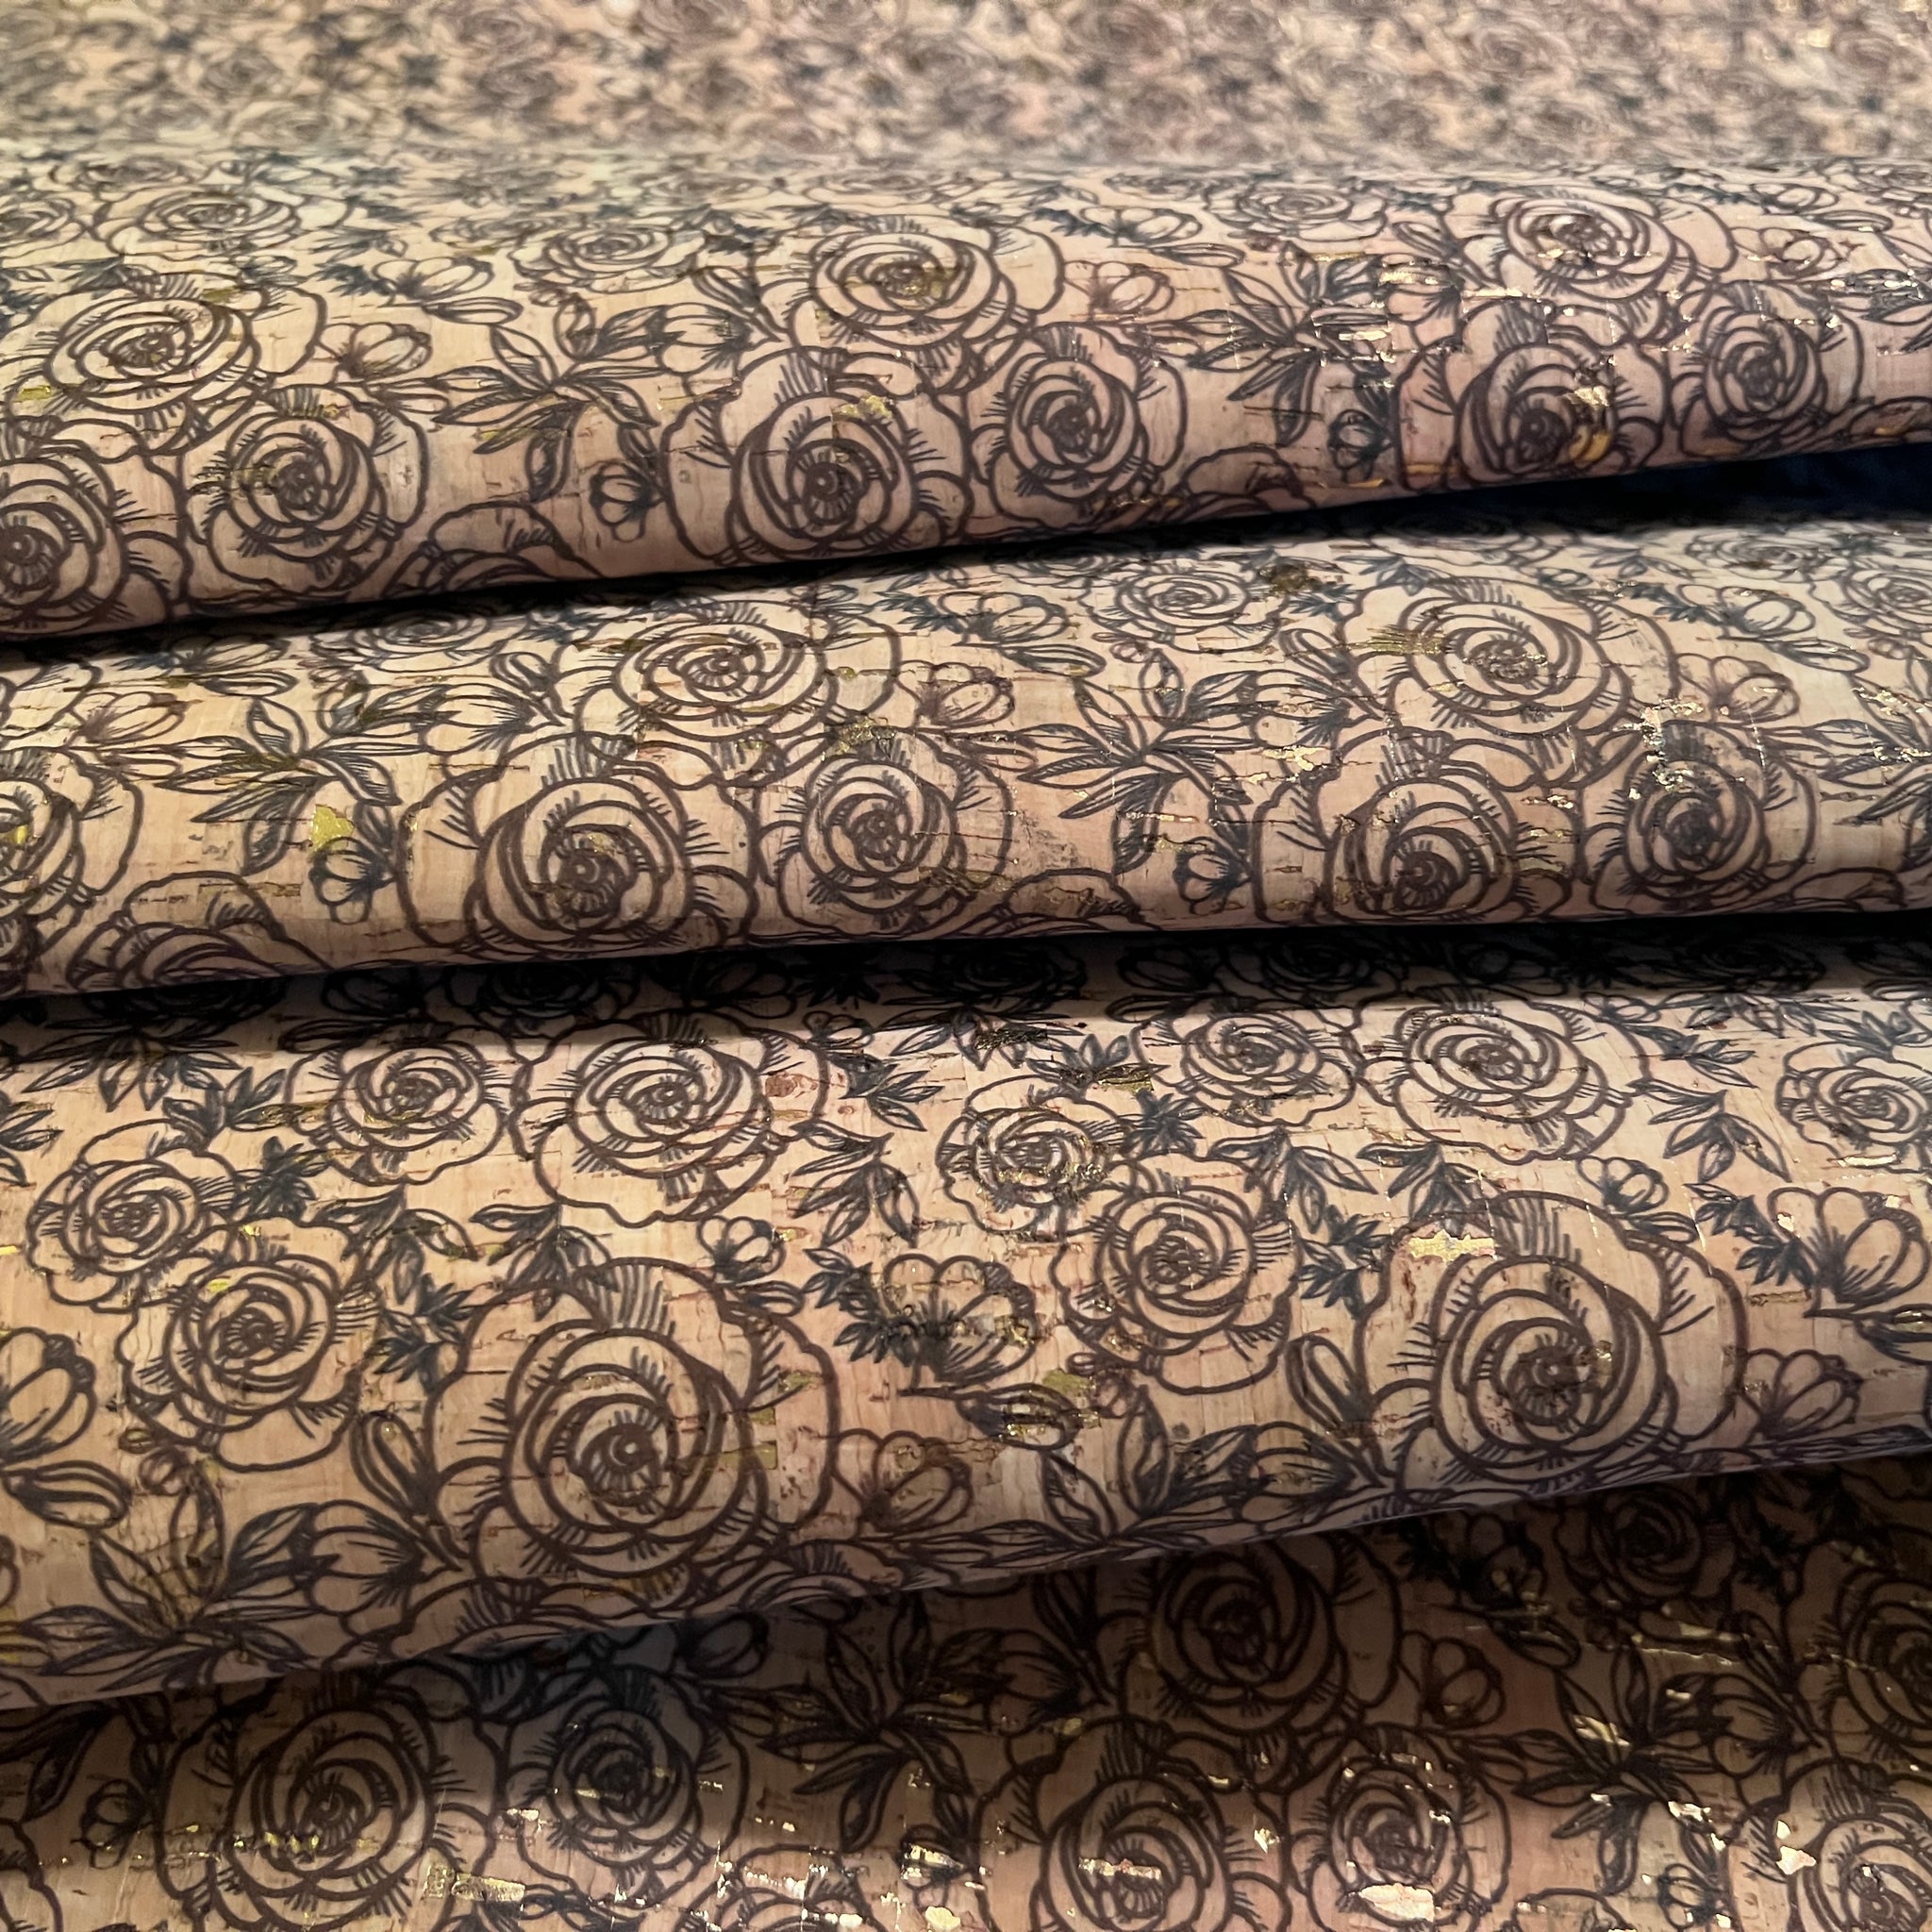 Cork fabric Natural with gold - quality vegan cork textile